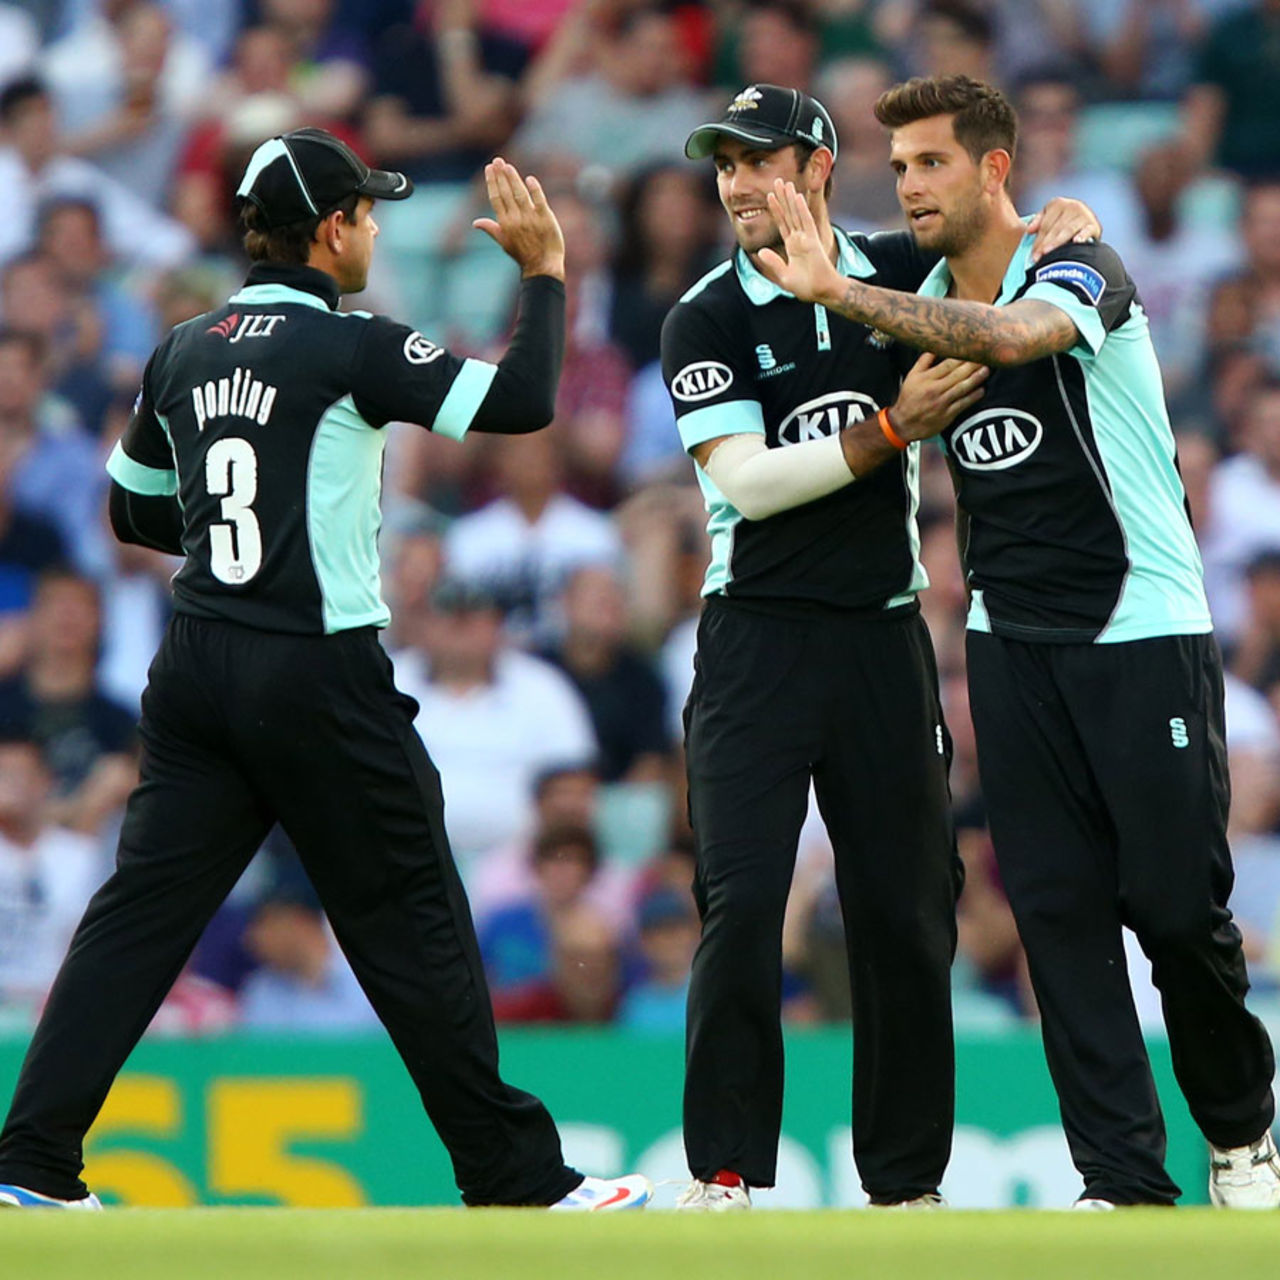 Jade Dernbach celebrates with Glenn Maxwell and Ricky Ponting, Surrey v Middlesex, FLt20, South Group, The Oval, July 5, 2013